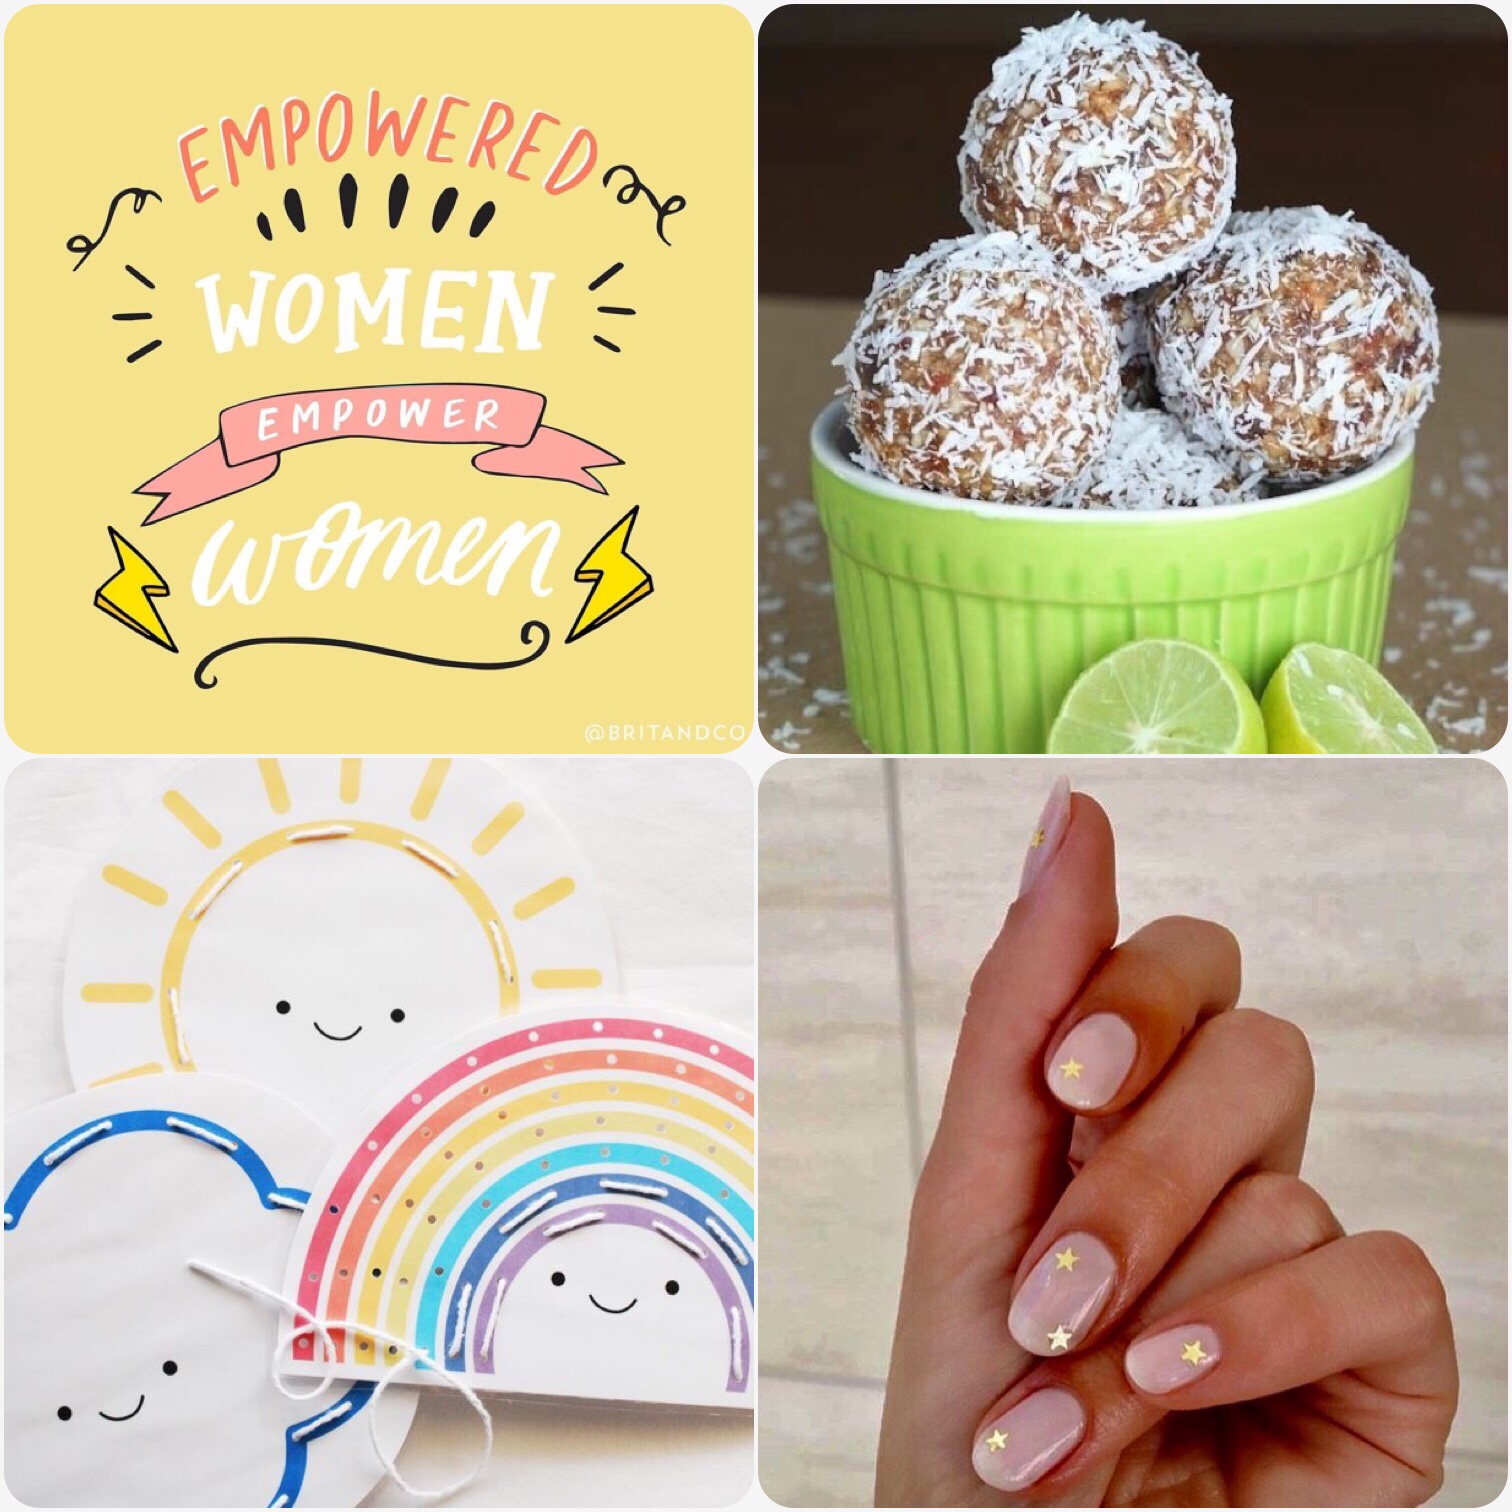 Fab Friday - girl power quote - Empowered Women empower women, key lime bliss balls, Kids stitching cards, Pink nails with gold star manicure 